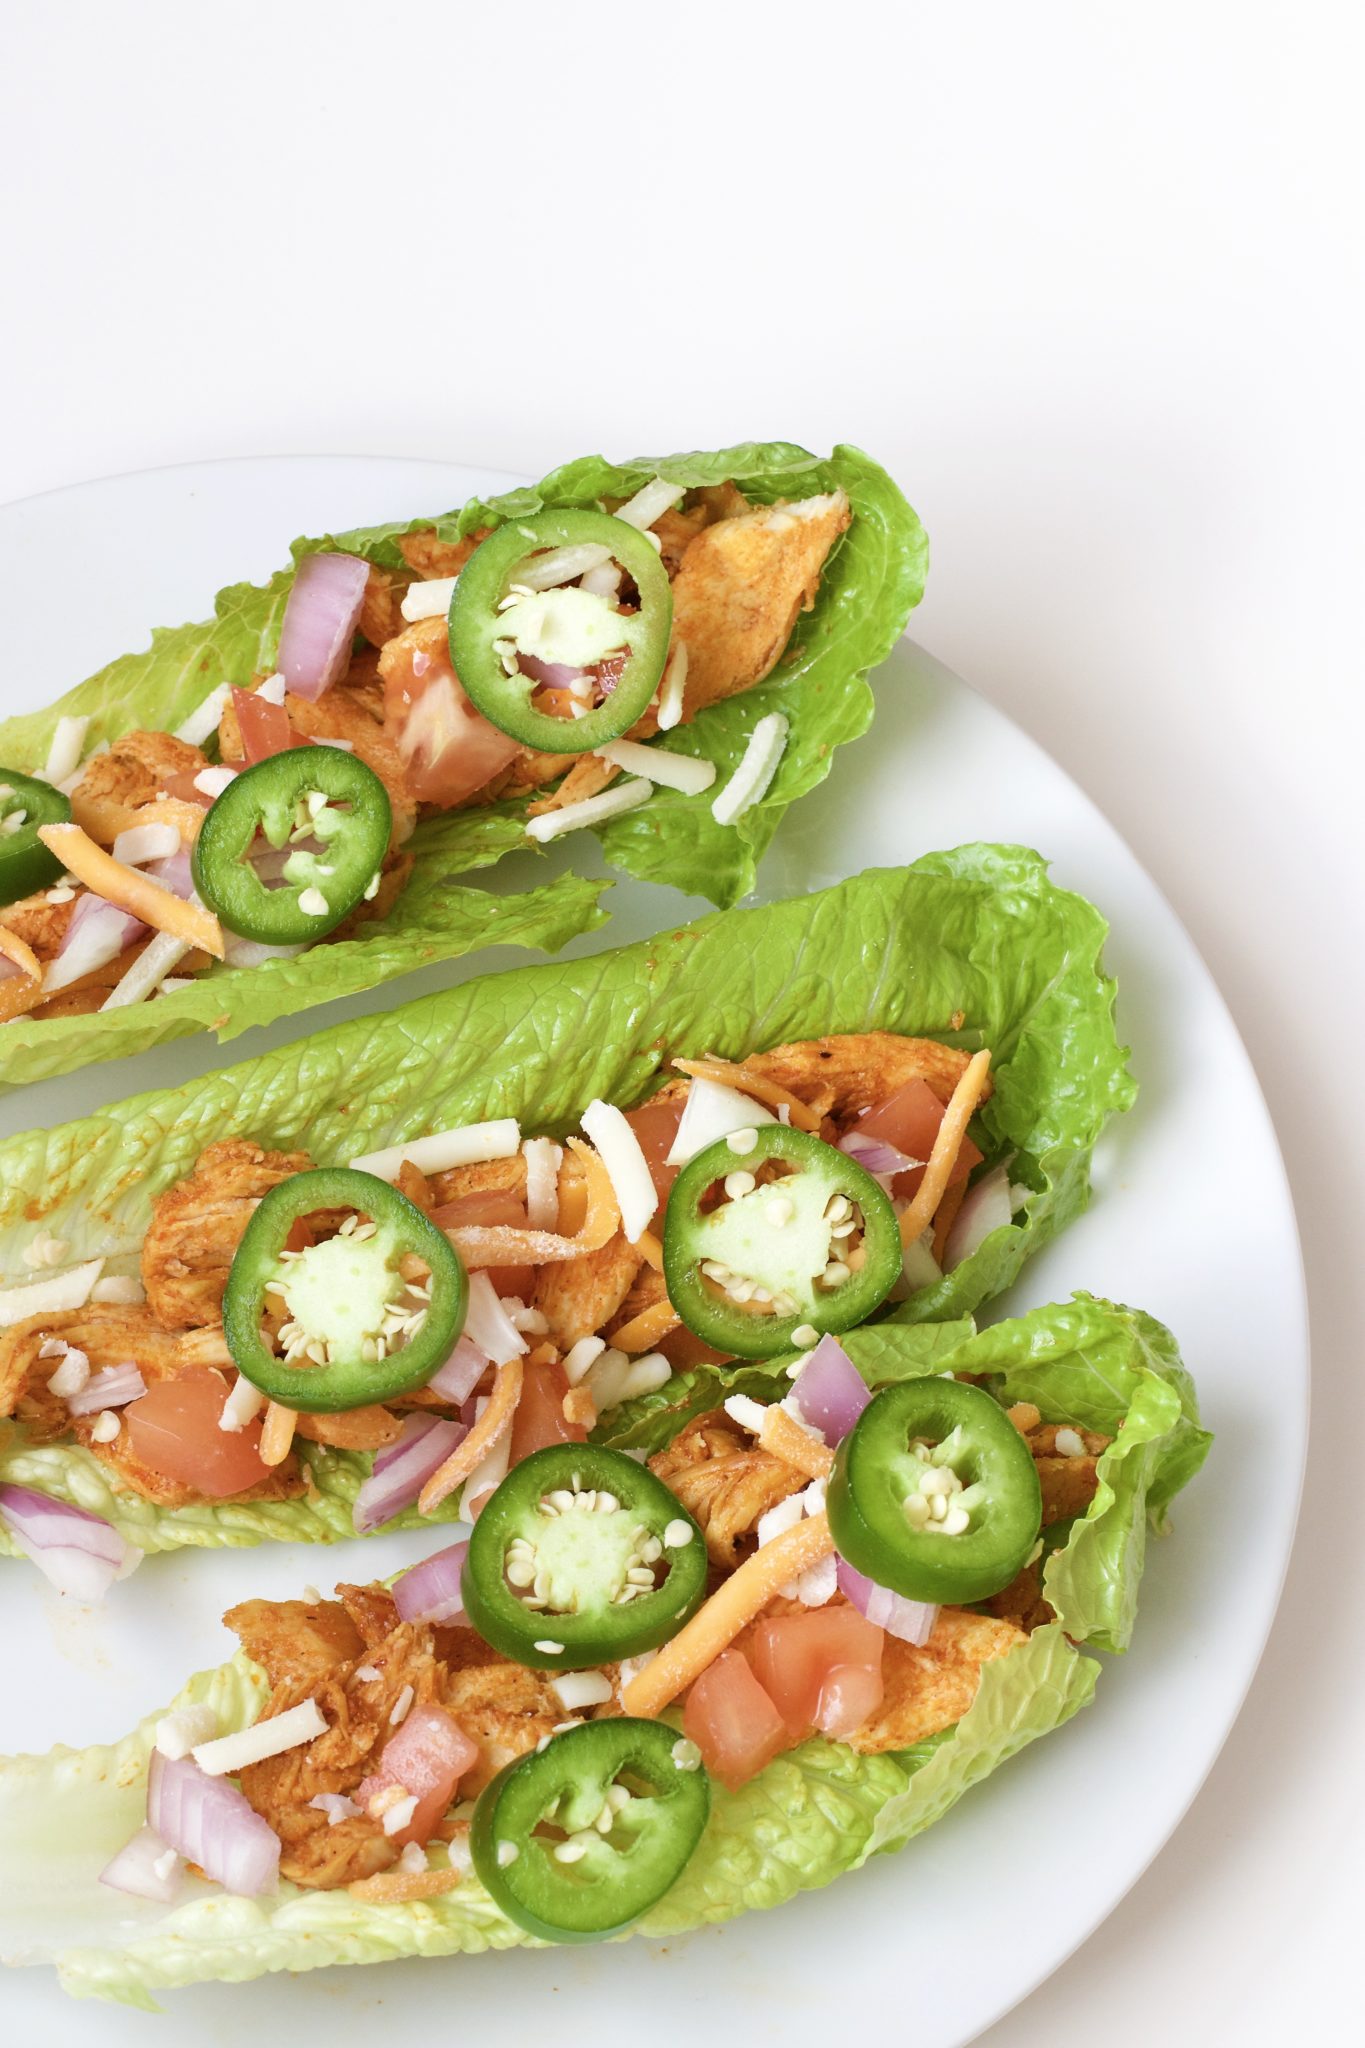 Light, crispy and delicious Buffalo Chicken Lettuce Tacos are made in 20 minutes or less. An easy, gluten-free, low carb, keto and paleo recipe. Enjoy the wraps as an appetizer or main dish. Mexican Recipes | Lettuce Tacos | Chicken Tacos | Spicy | Hot Sauce | Summer Recipe | Game Night | Date Night | Dinner | Low Carb | Ketogenic | Keto | Weight Loss | Buffalo Chicken | Paleo | Easy Dinner | Salad | Romain Lettuce | Lettuce Taco Shells | Lettuce Wraps |